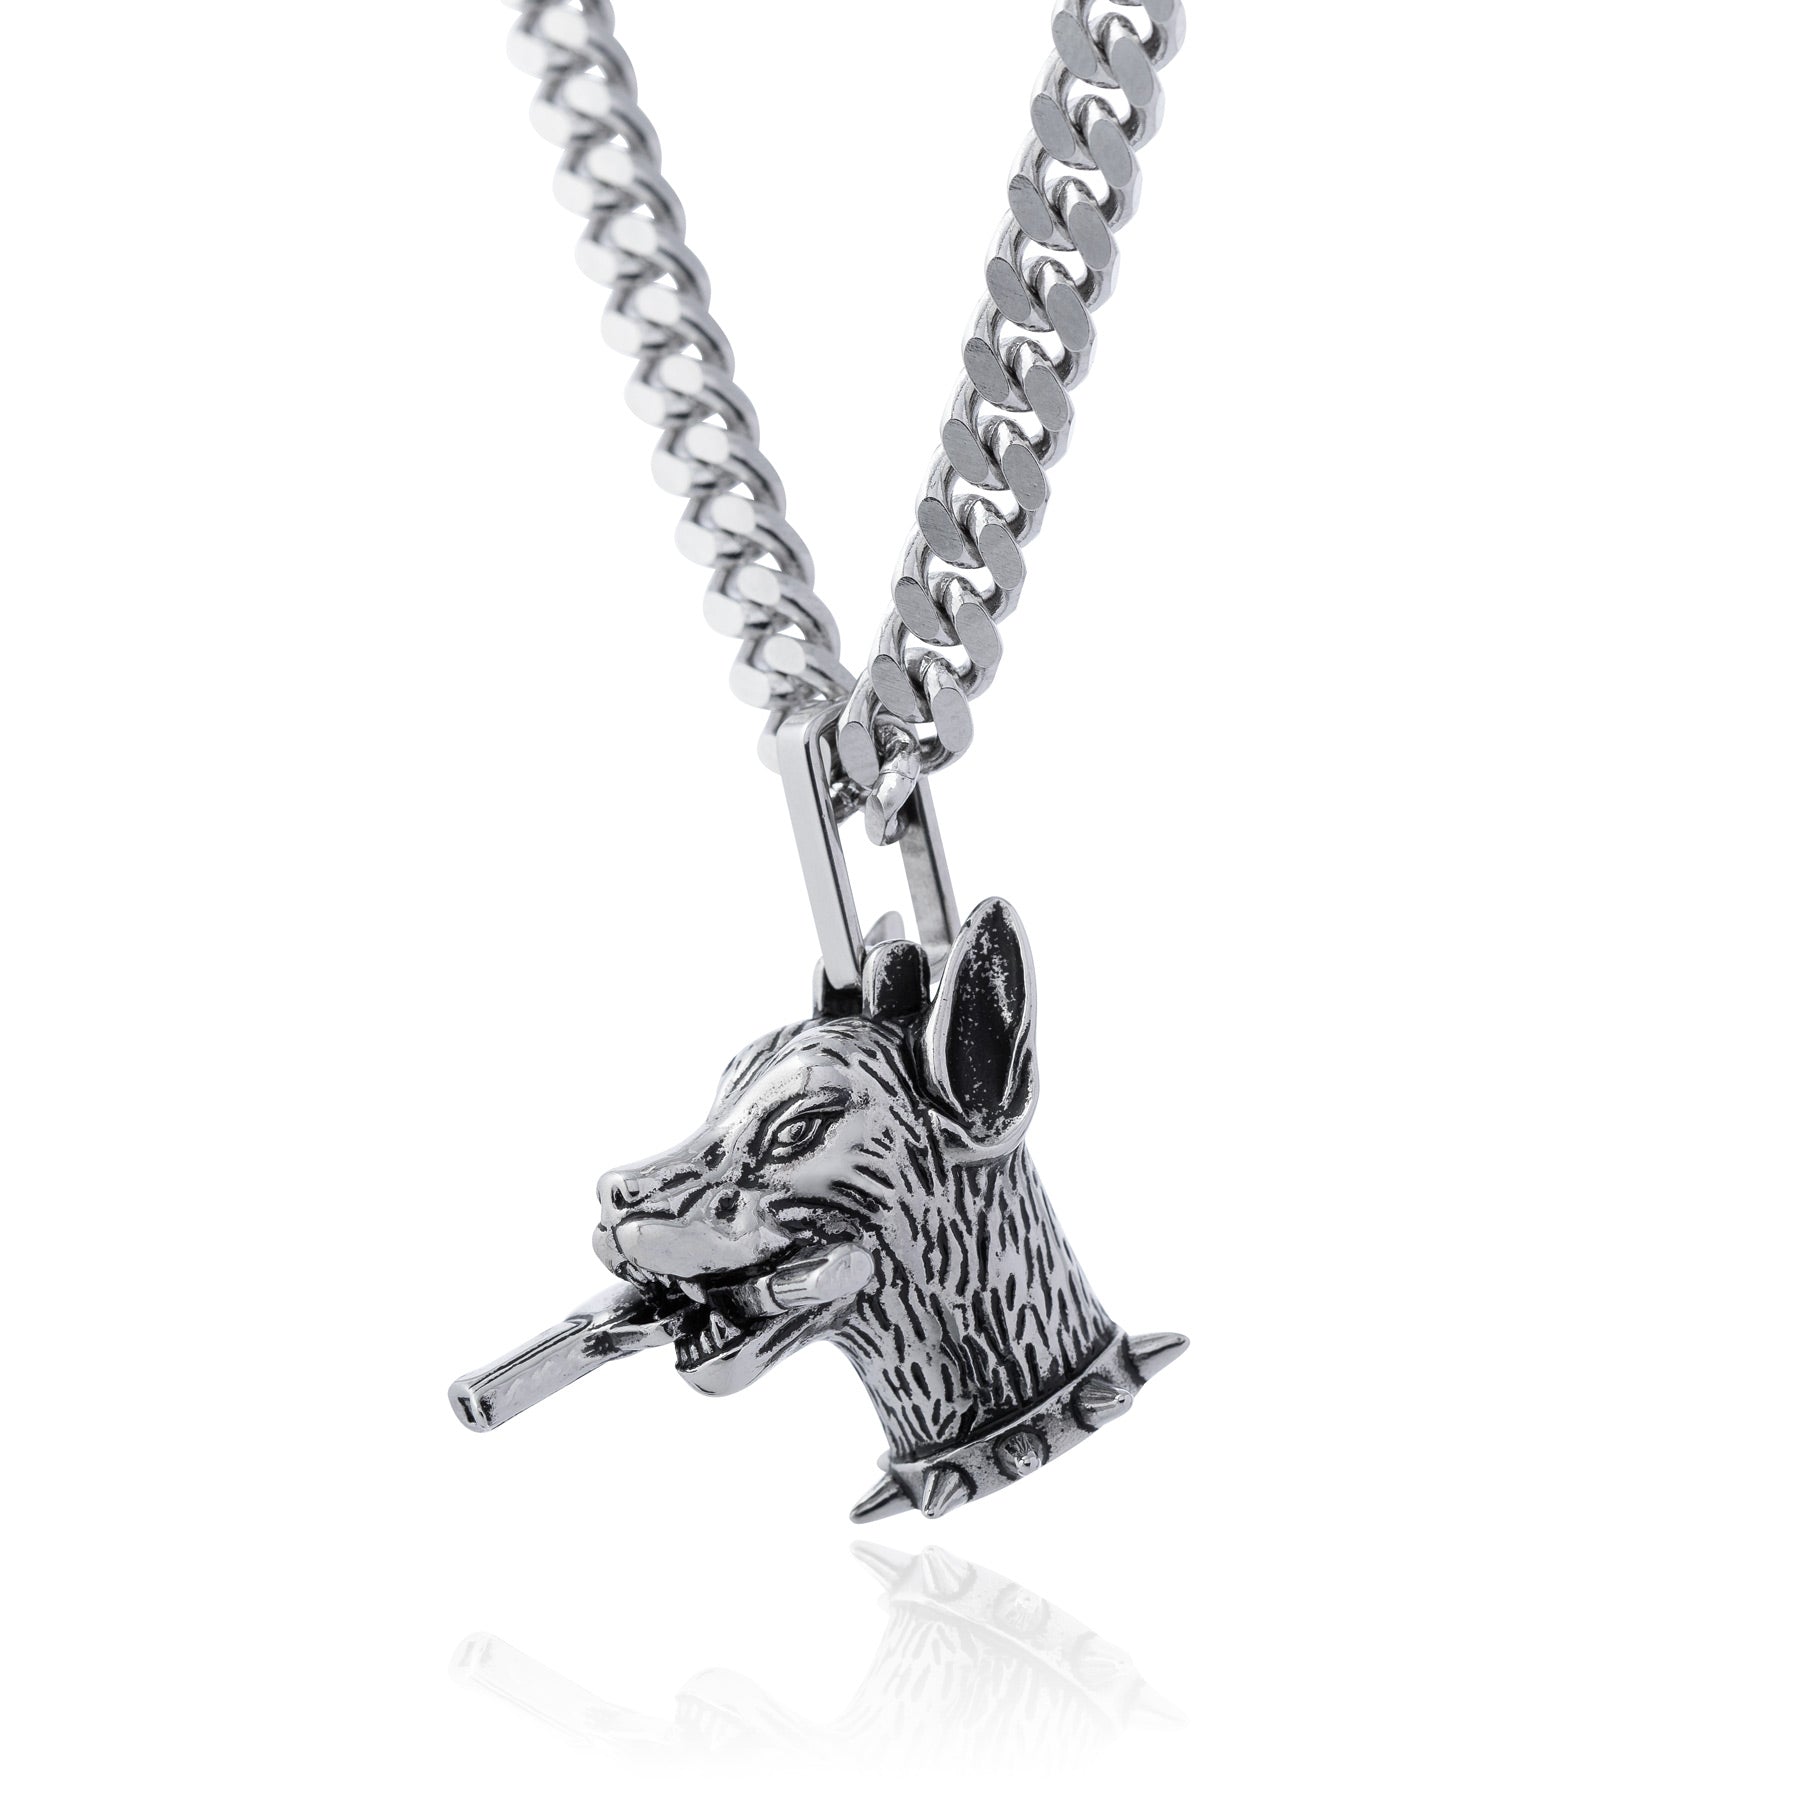 Statement Collective - "The Guard Dog" Pendant Necklace